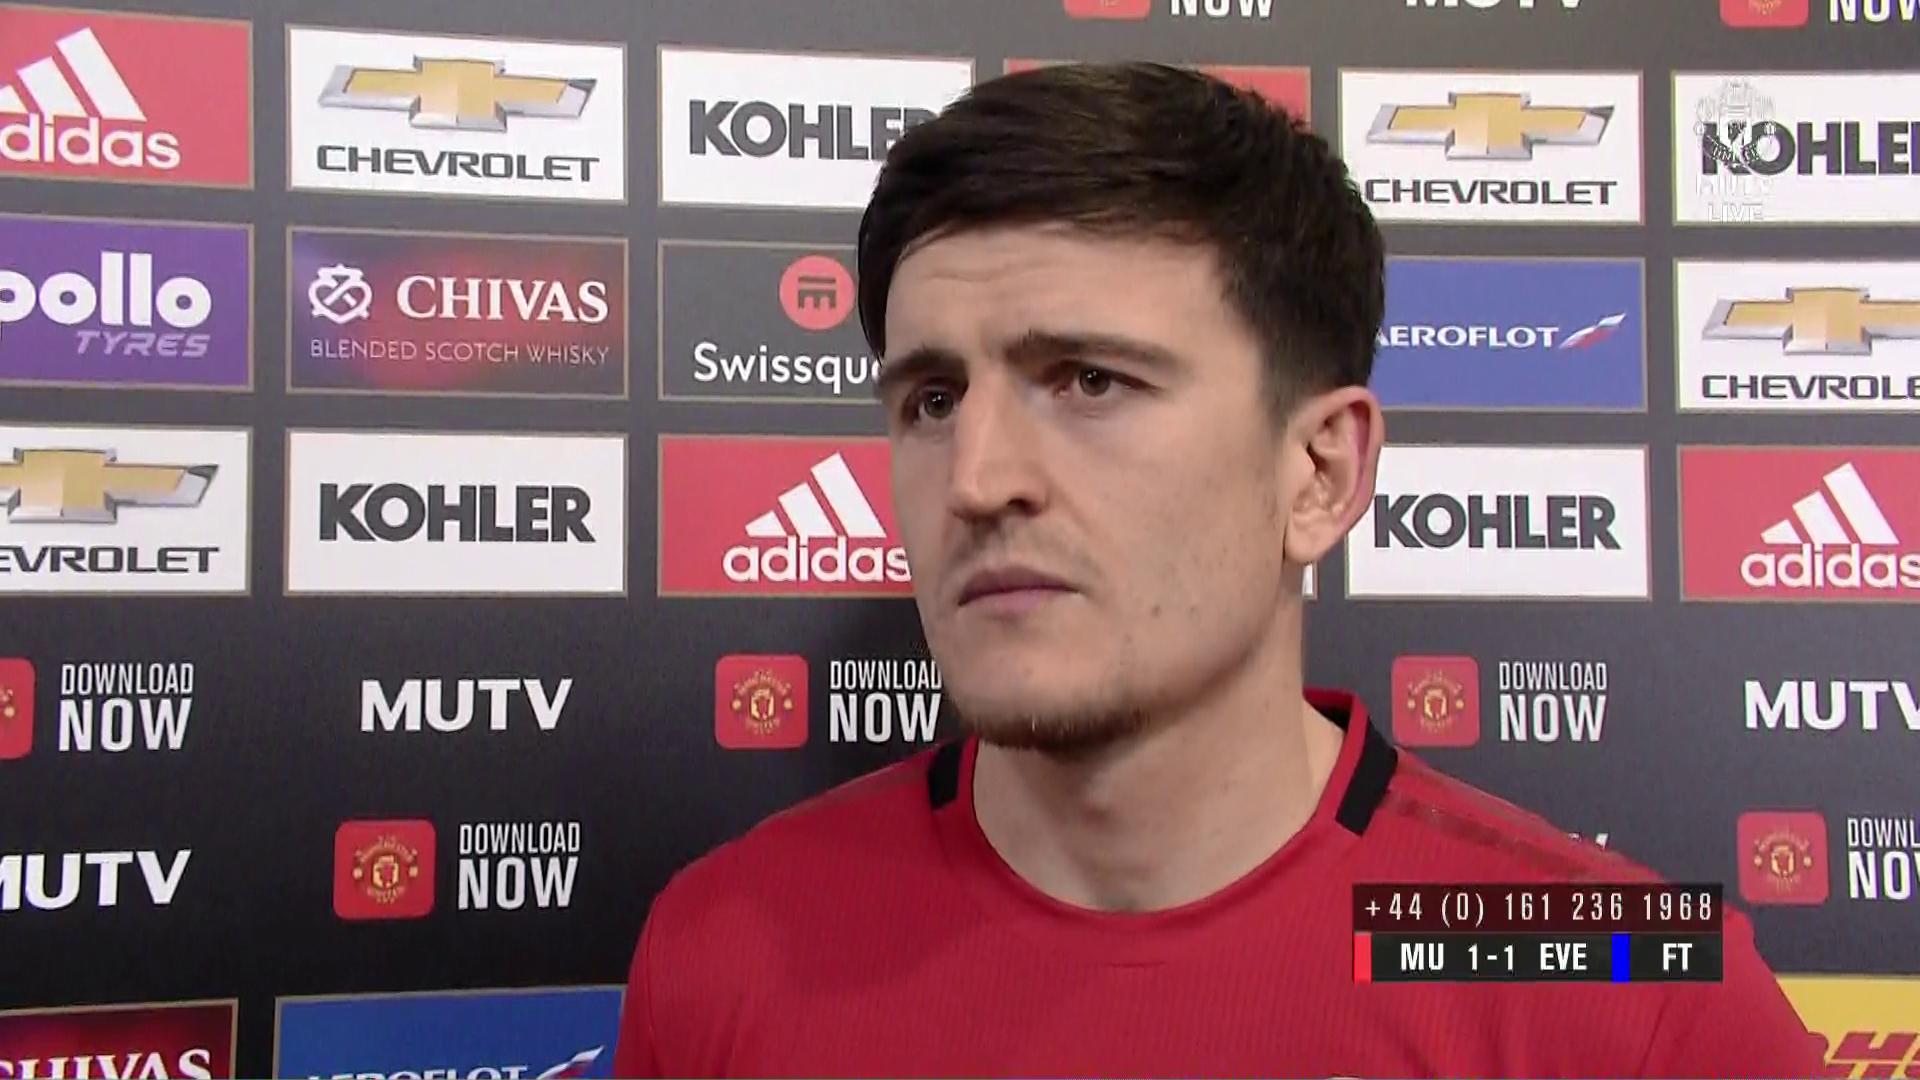 Harry Maguire interview after Man Utd 1 Everton 1 on 15 Dec 2019